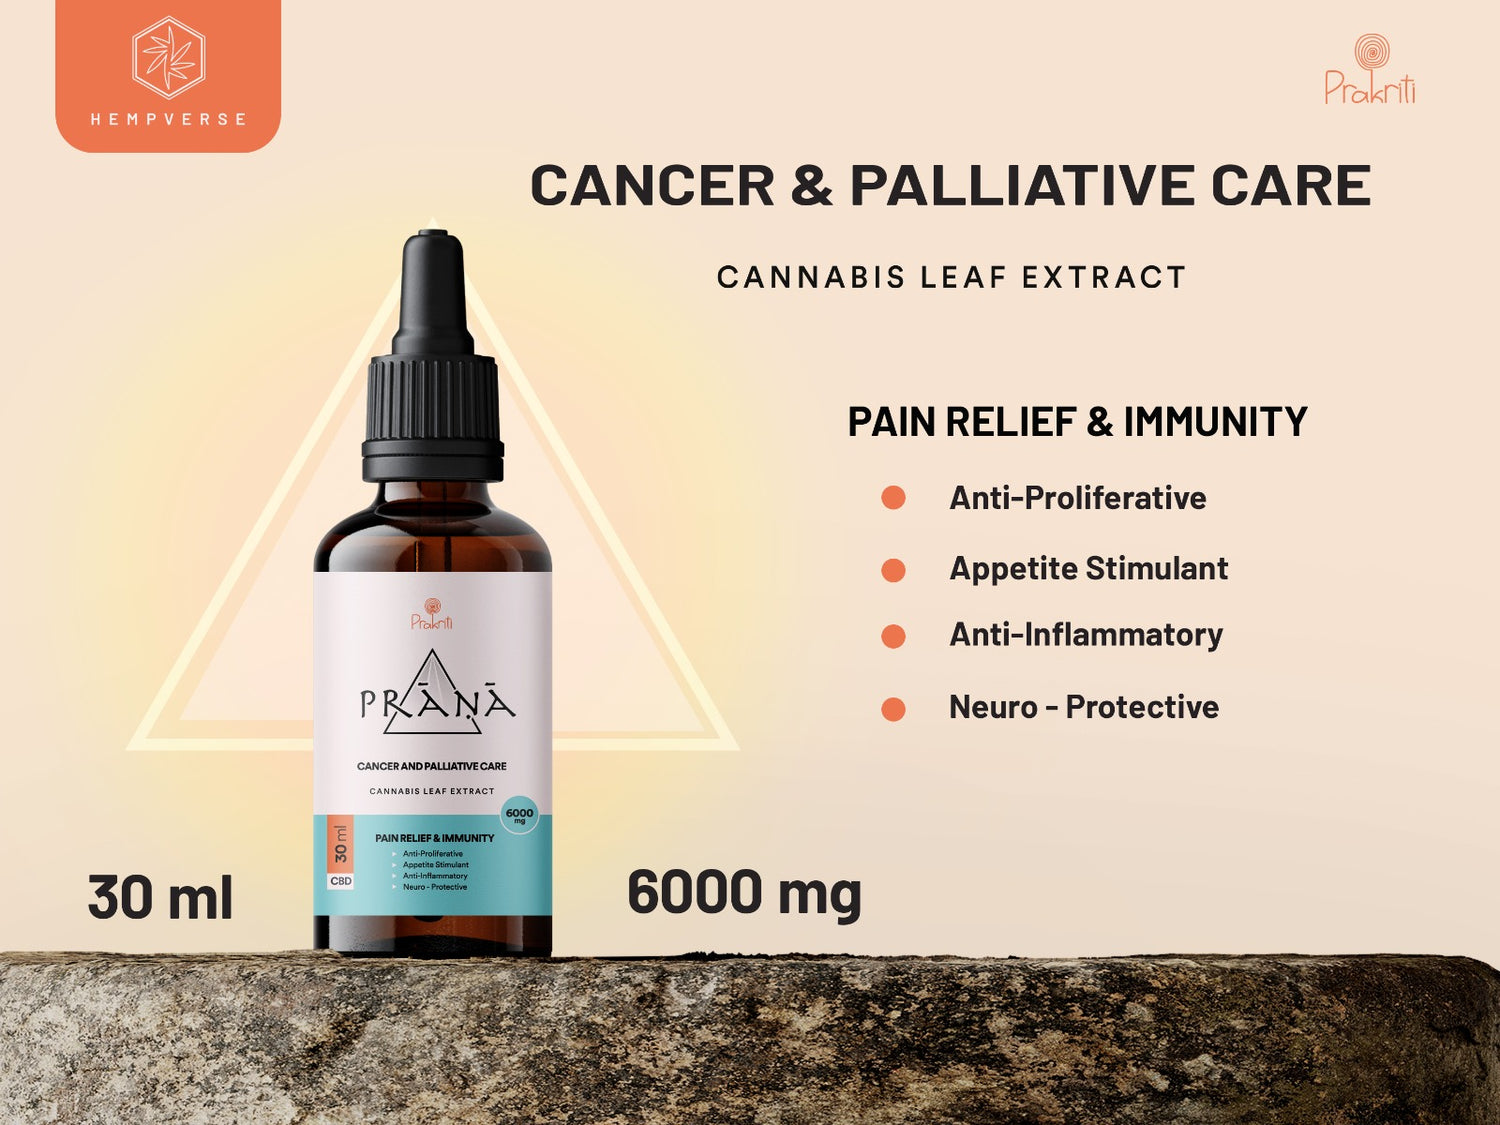 Prana is an ayurvedic medicine for alleviating cancer pain and improve appetite and immunity.